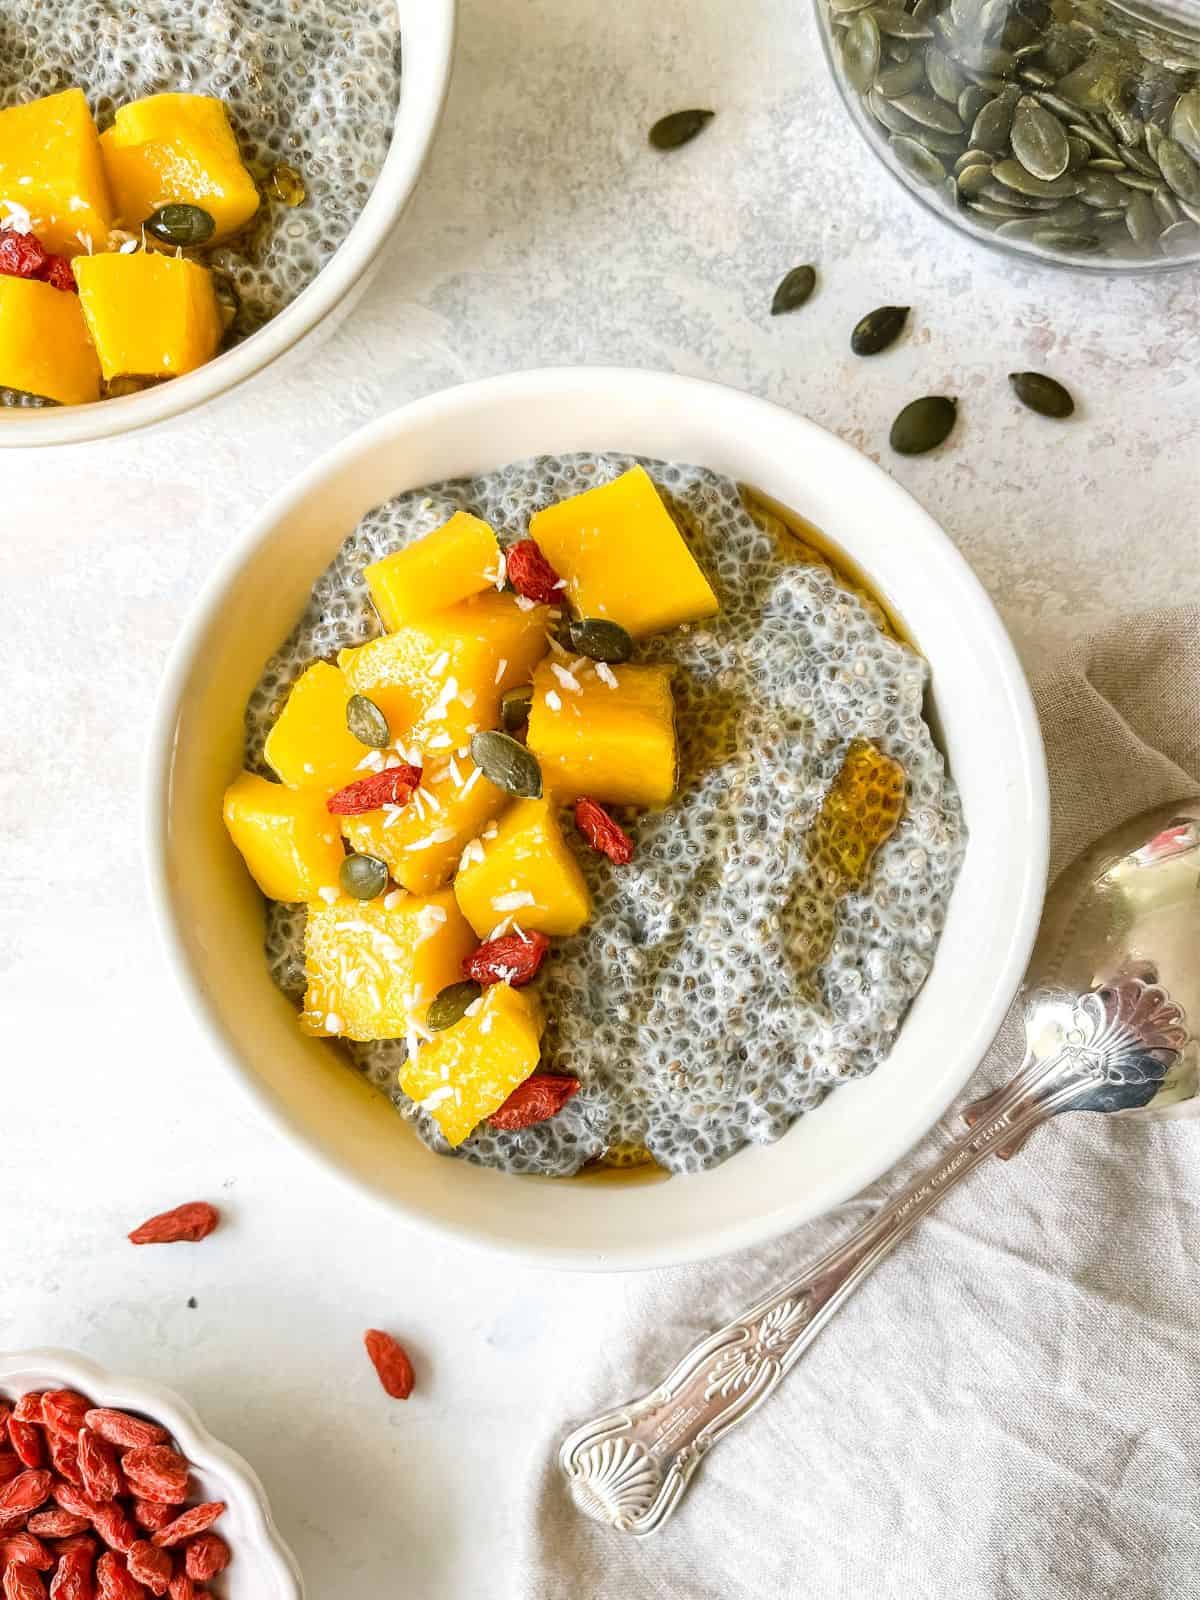 warm chia pudding topped with mango chunks in two cream bowls next to a spoon and glass jar of pumpkin seeds.